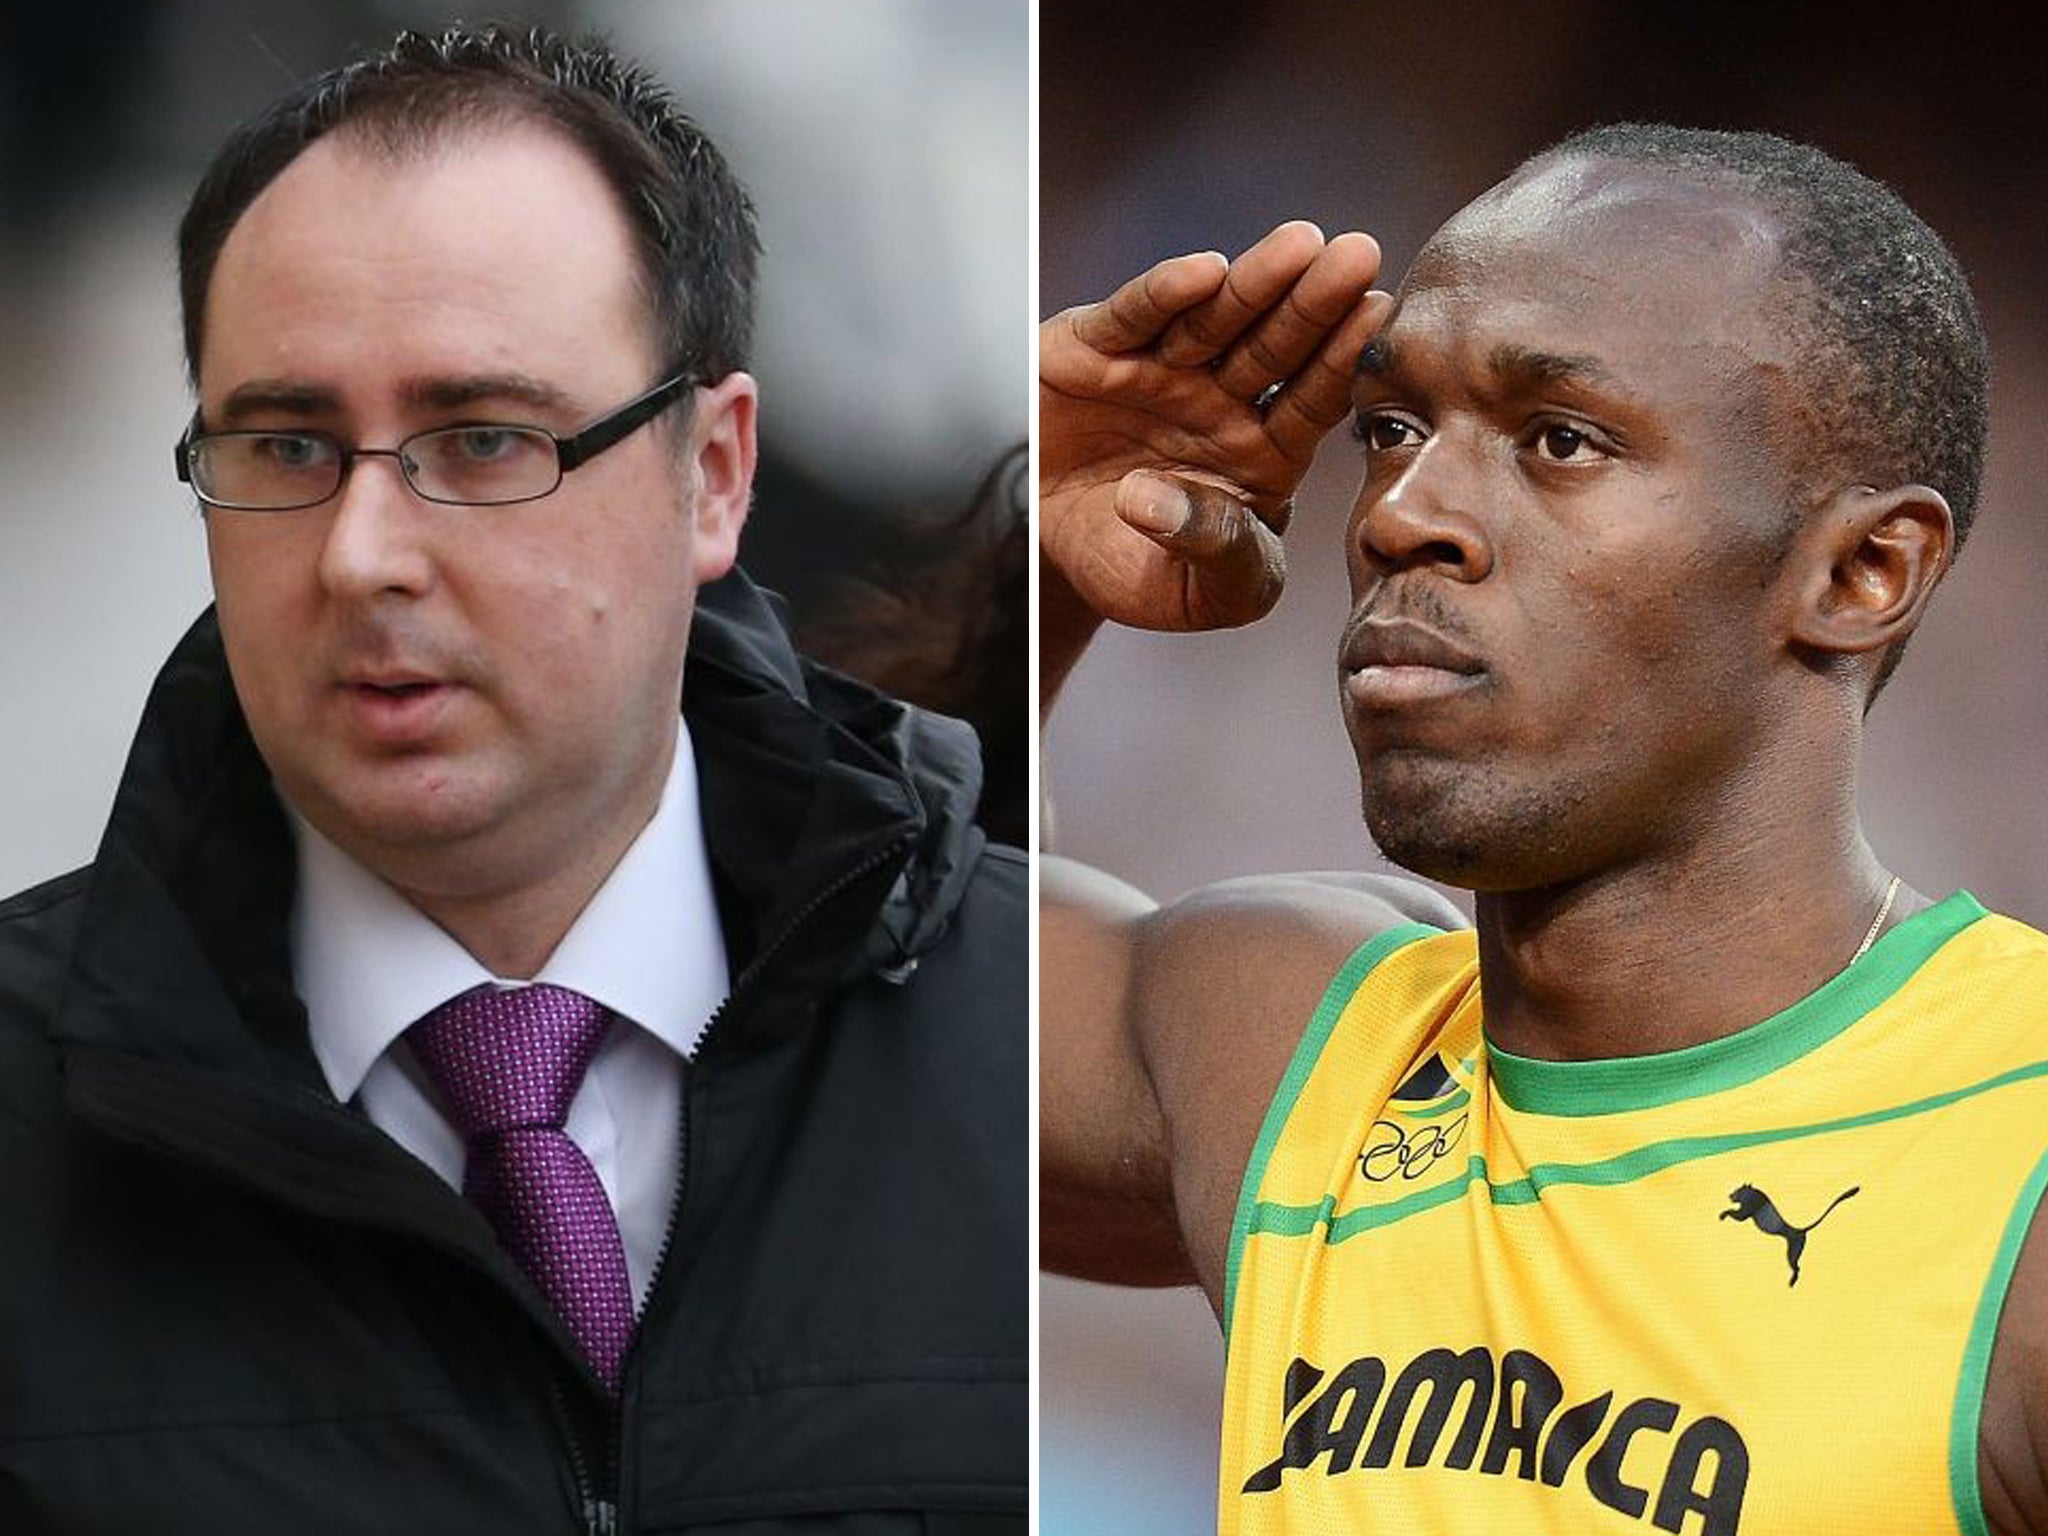 Ashley Gill-Webb, 34, pushed his way to the front of an exclusive seating area without a ticket and shouting abuse at the Jamaican sprinter Usain Bolt